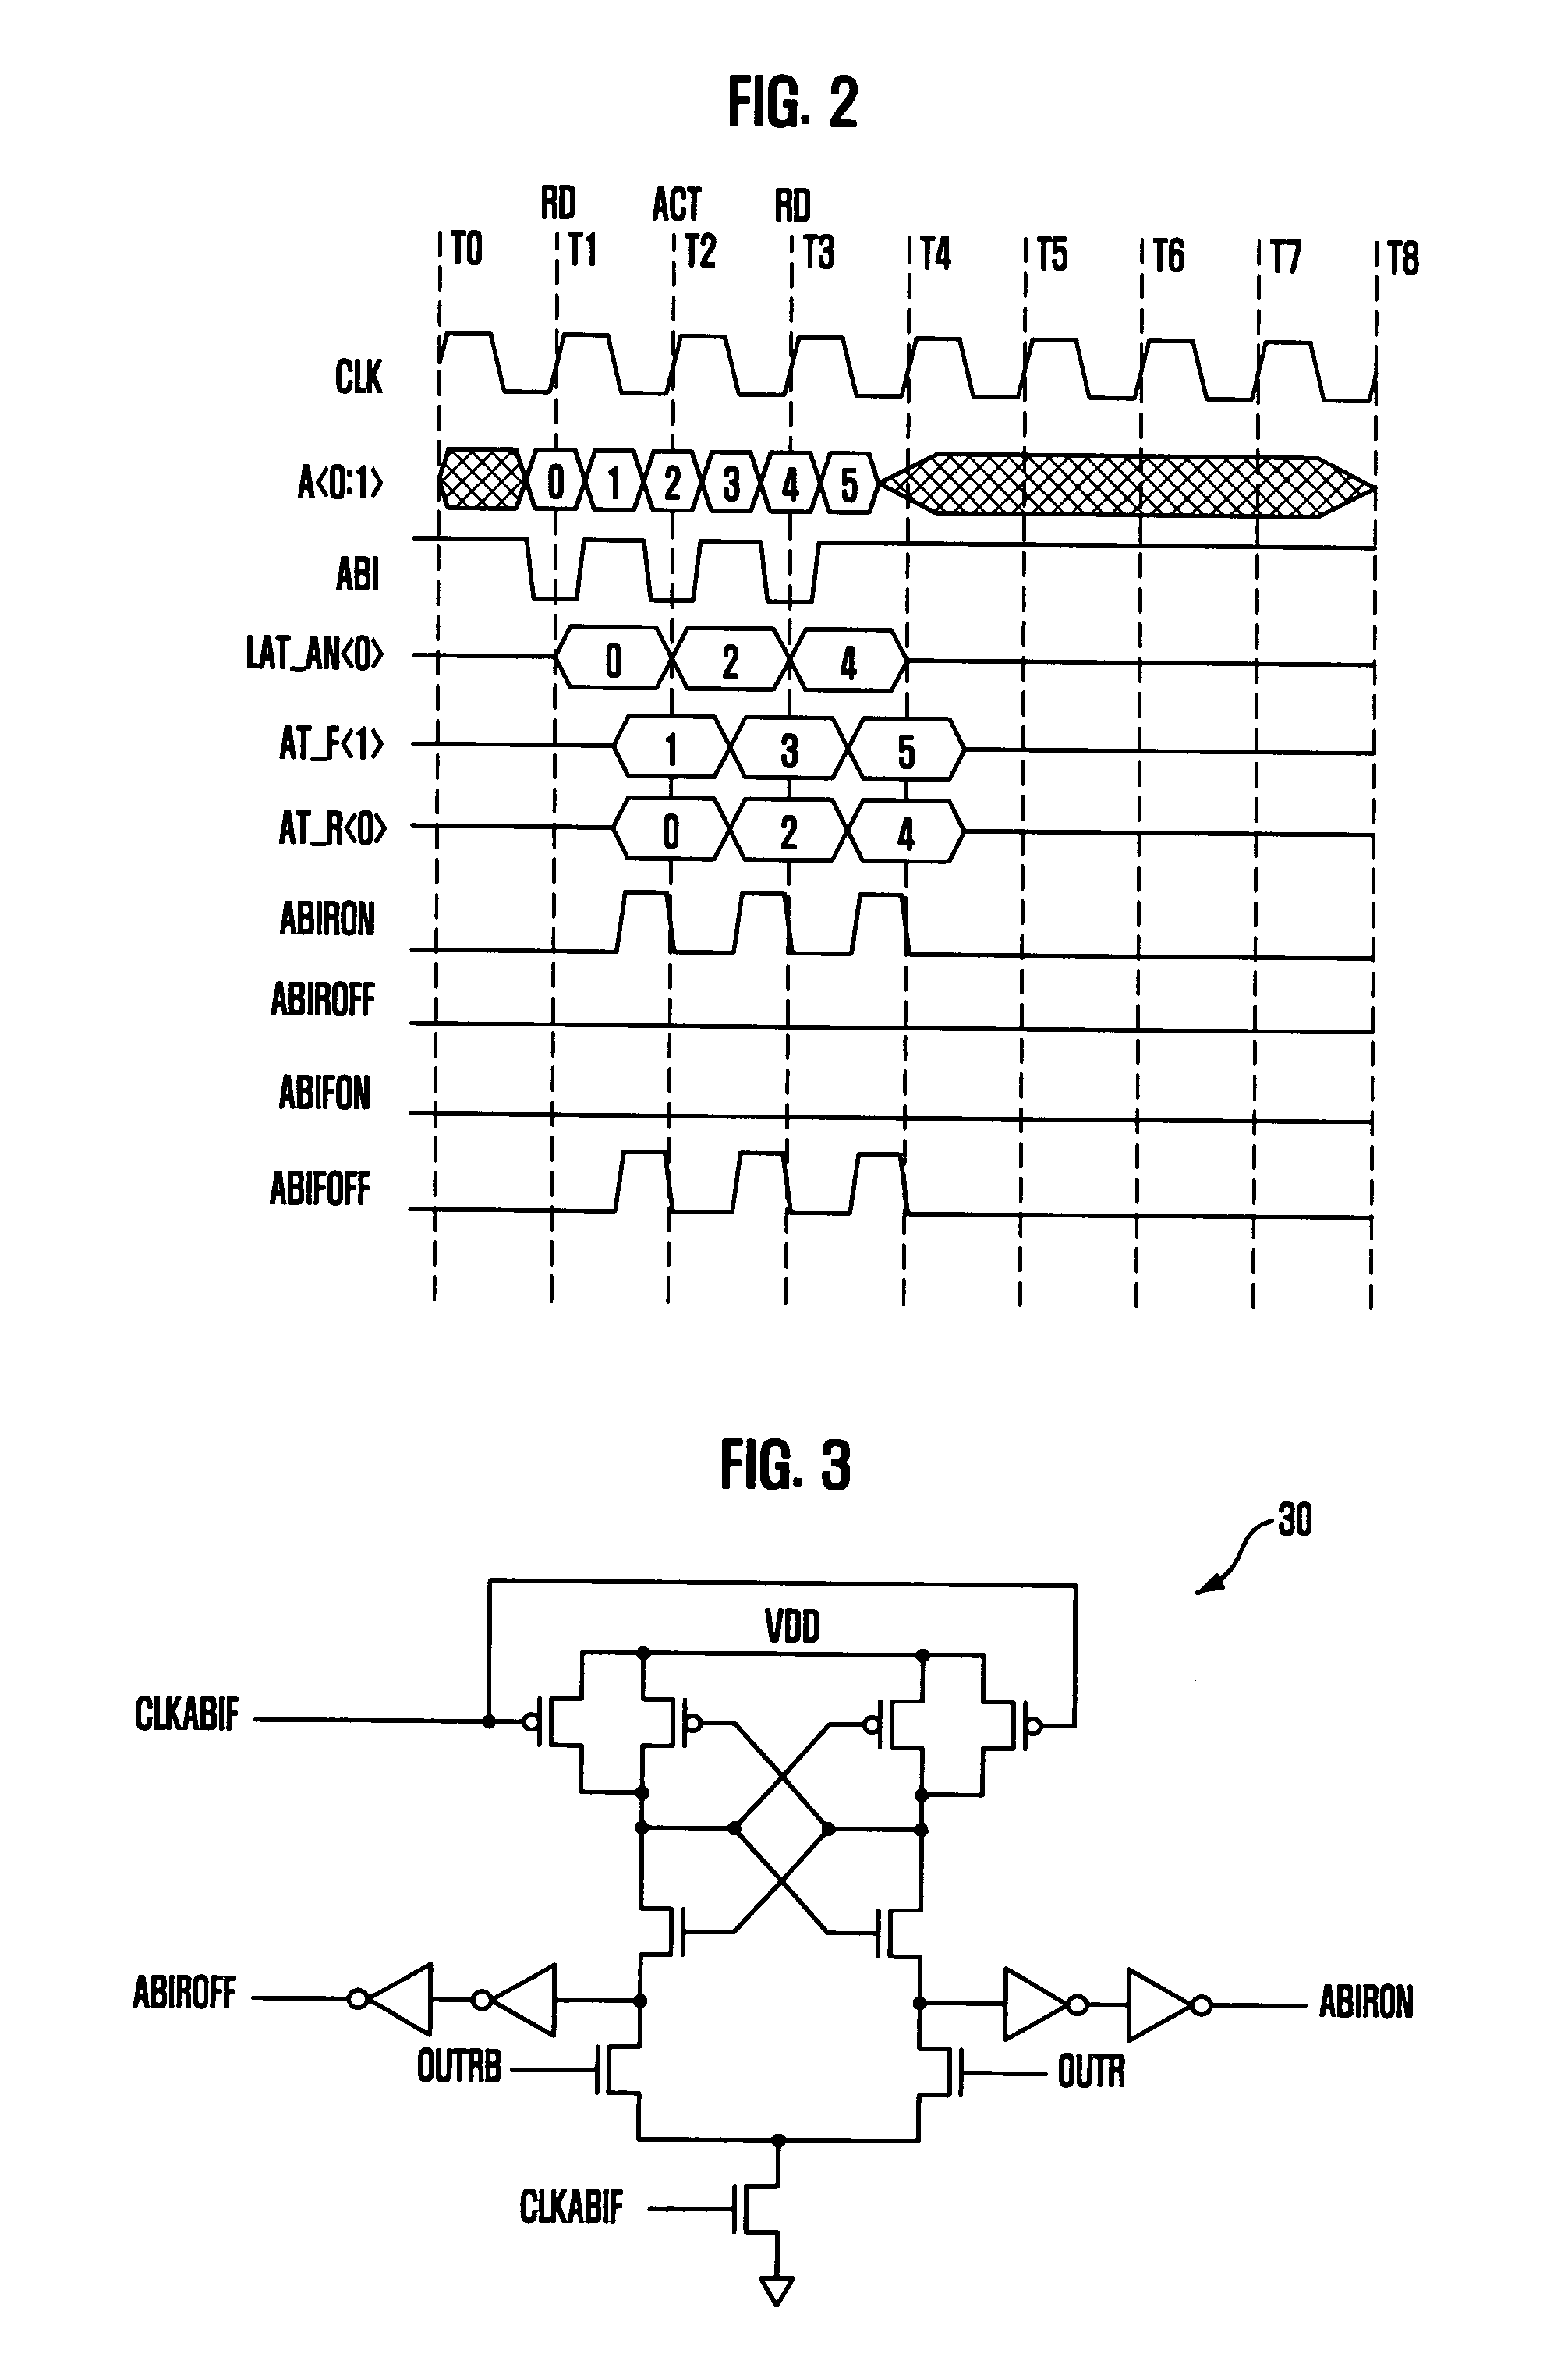 Semiconductor memory device using bus inversion scheme